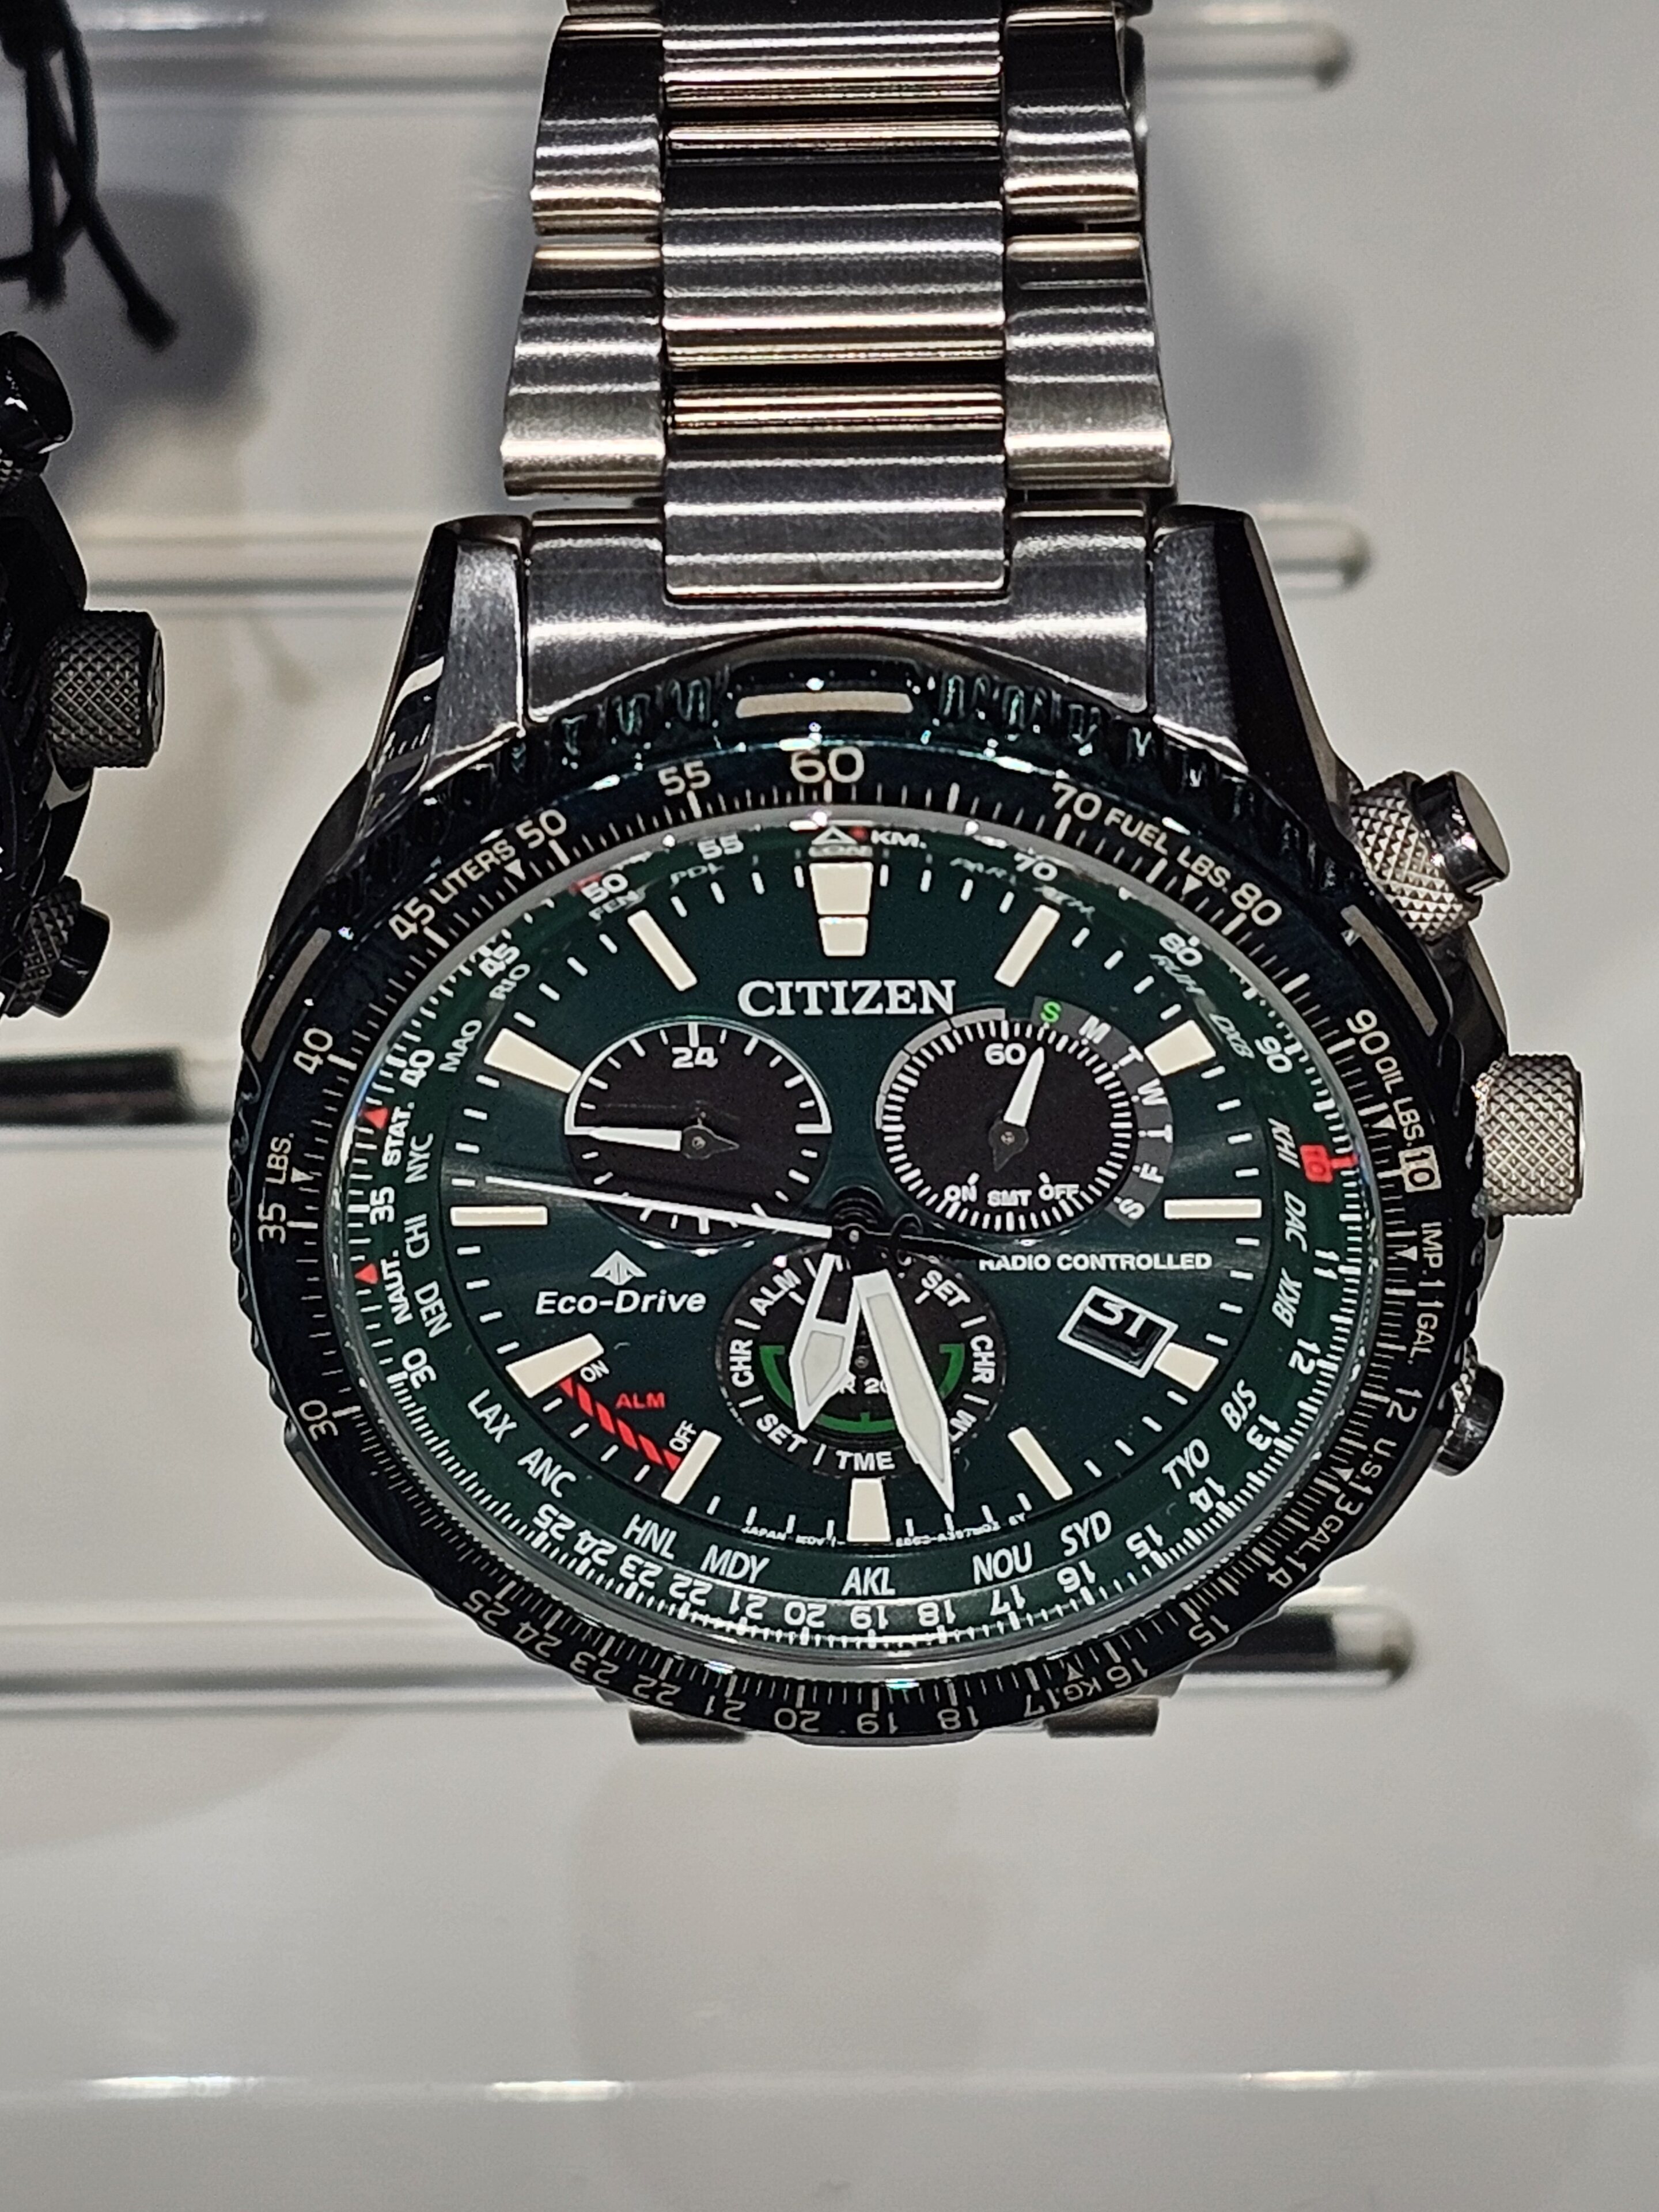 Pistonheads - The image showcases a wristwatch with a green and black color scheme. It has multiple dials and sub-dials, indicative of various timekeeping features. The watch is mounted on a display stand inside a store or exhibition space. In the background, there's a glimpse of another item, possibly another watch or a piece of jewelry. The image does not provide any text or additional context about the location or brand of the watch.